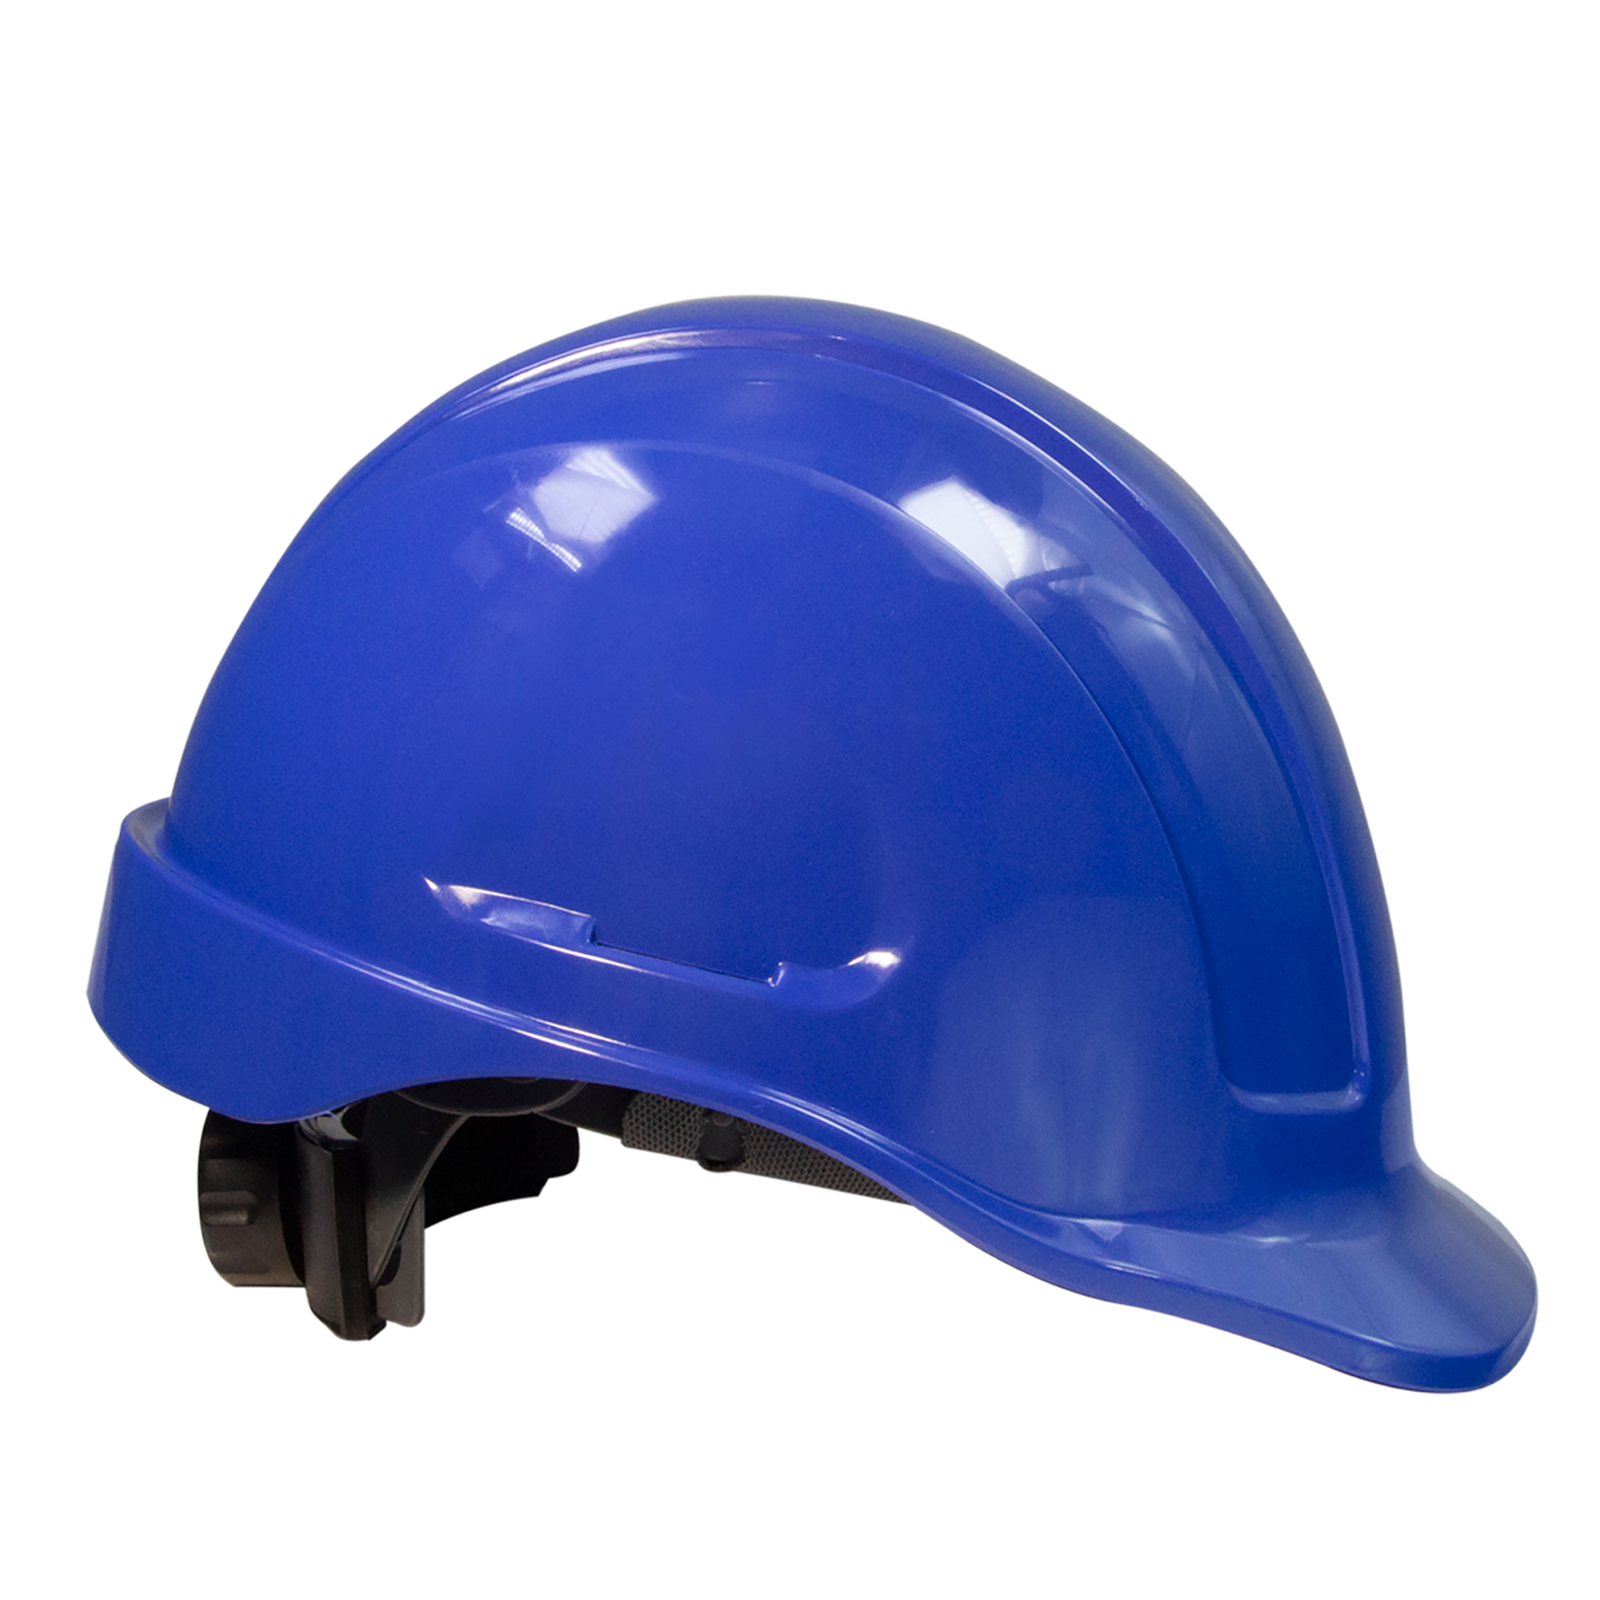 Blue hard hat with slots compatible with JORESTECH Earmuffs